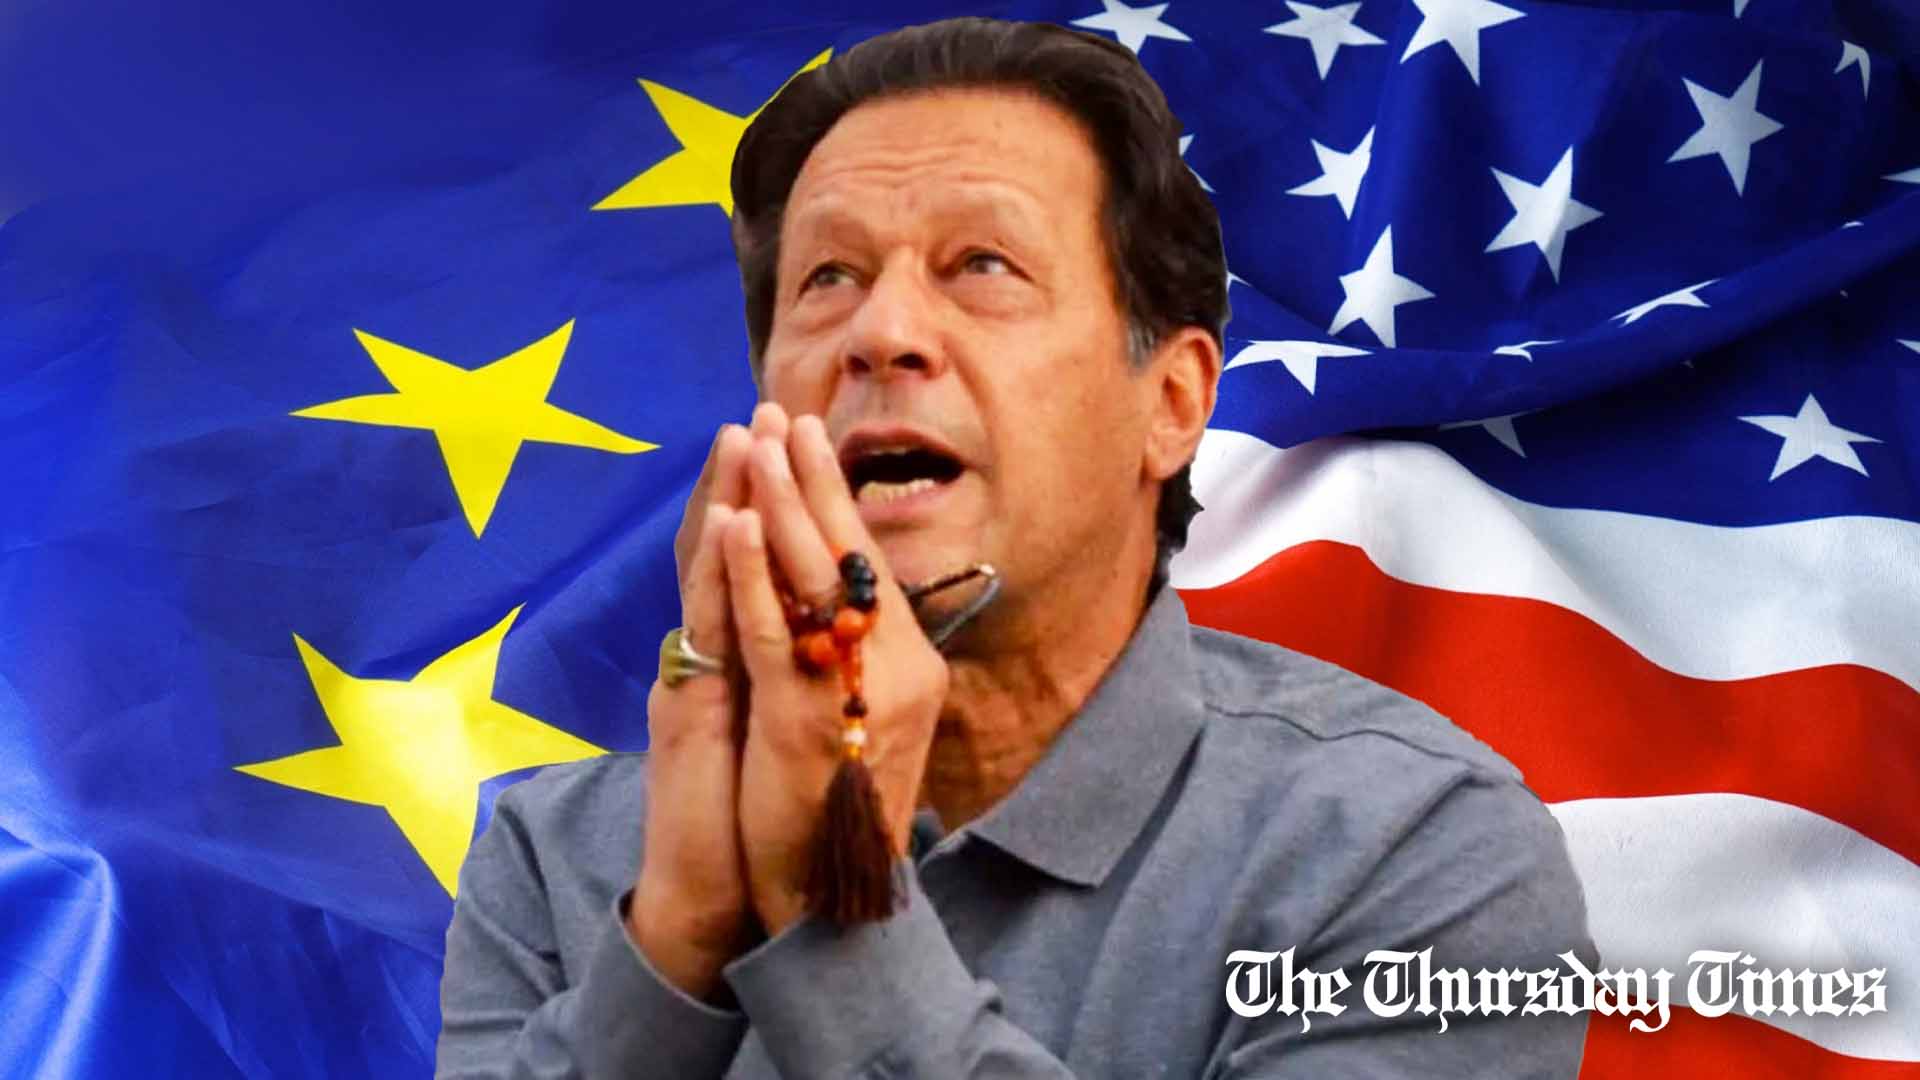 A file photo is shown of former prime minister Imran Khan. — FILE/THE THURSDAY TIMES